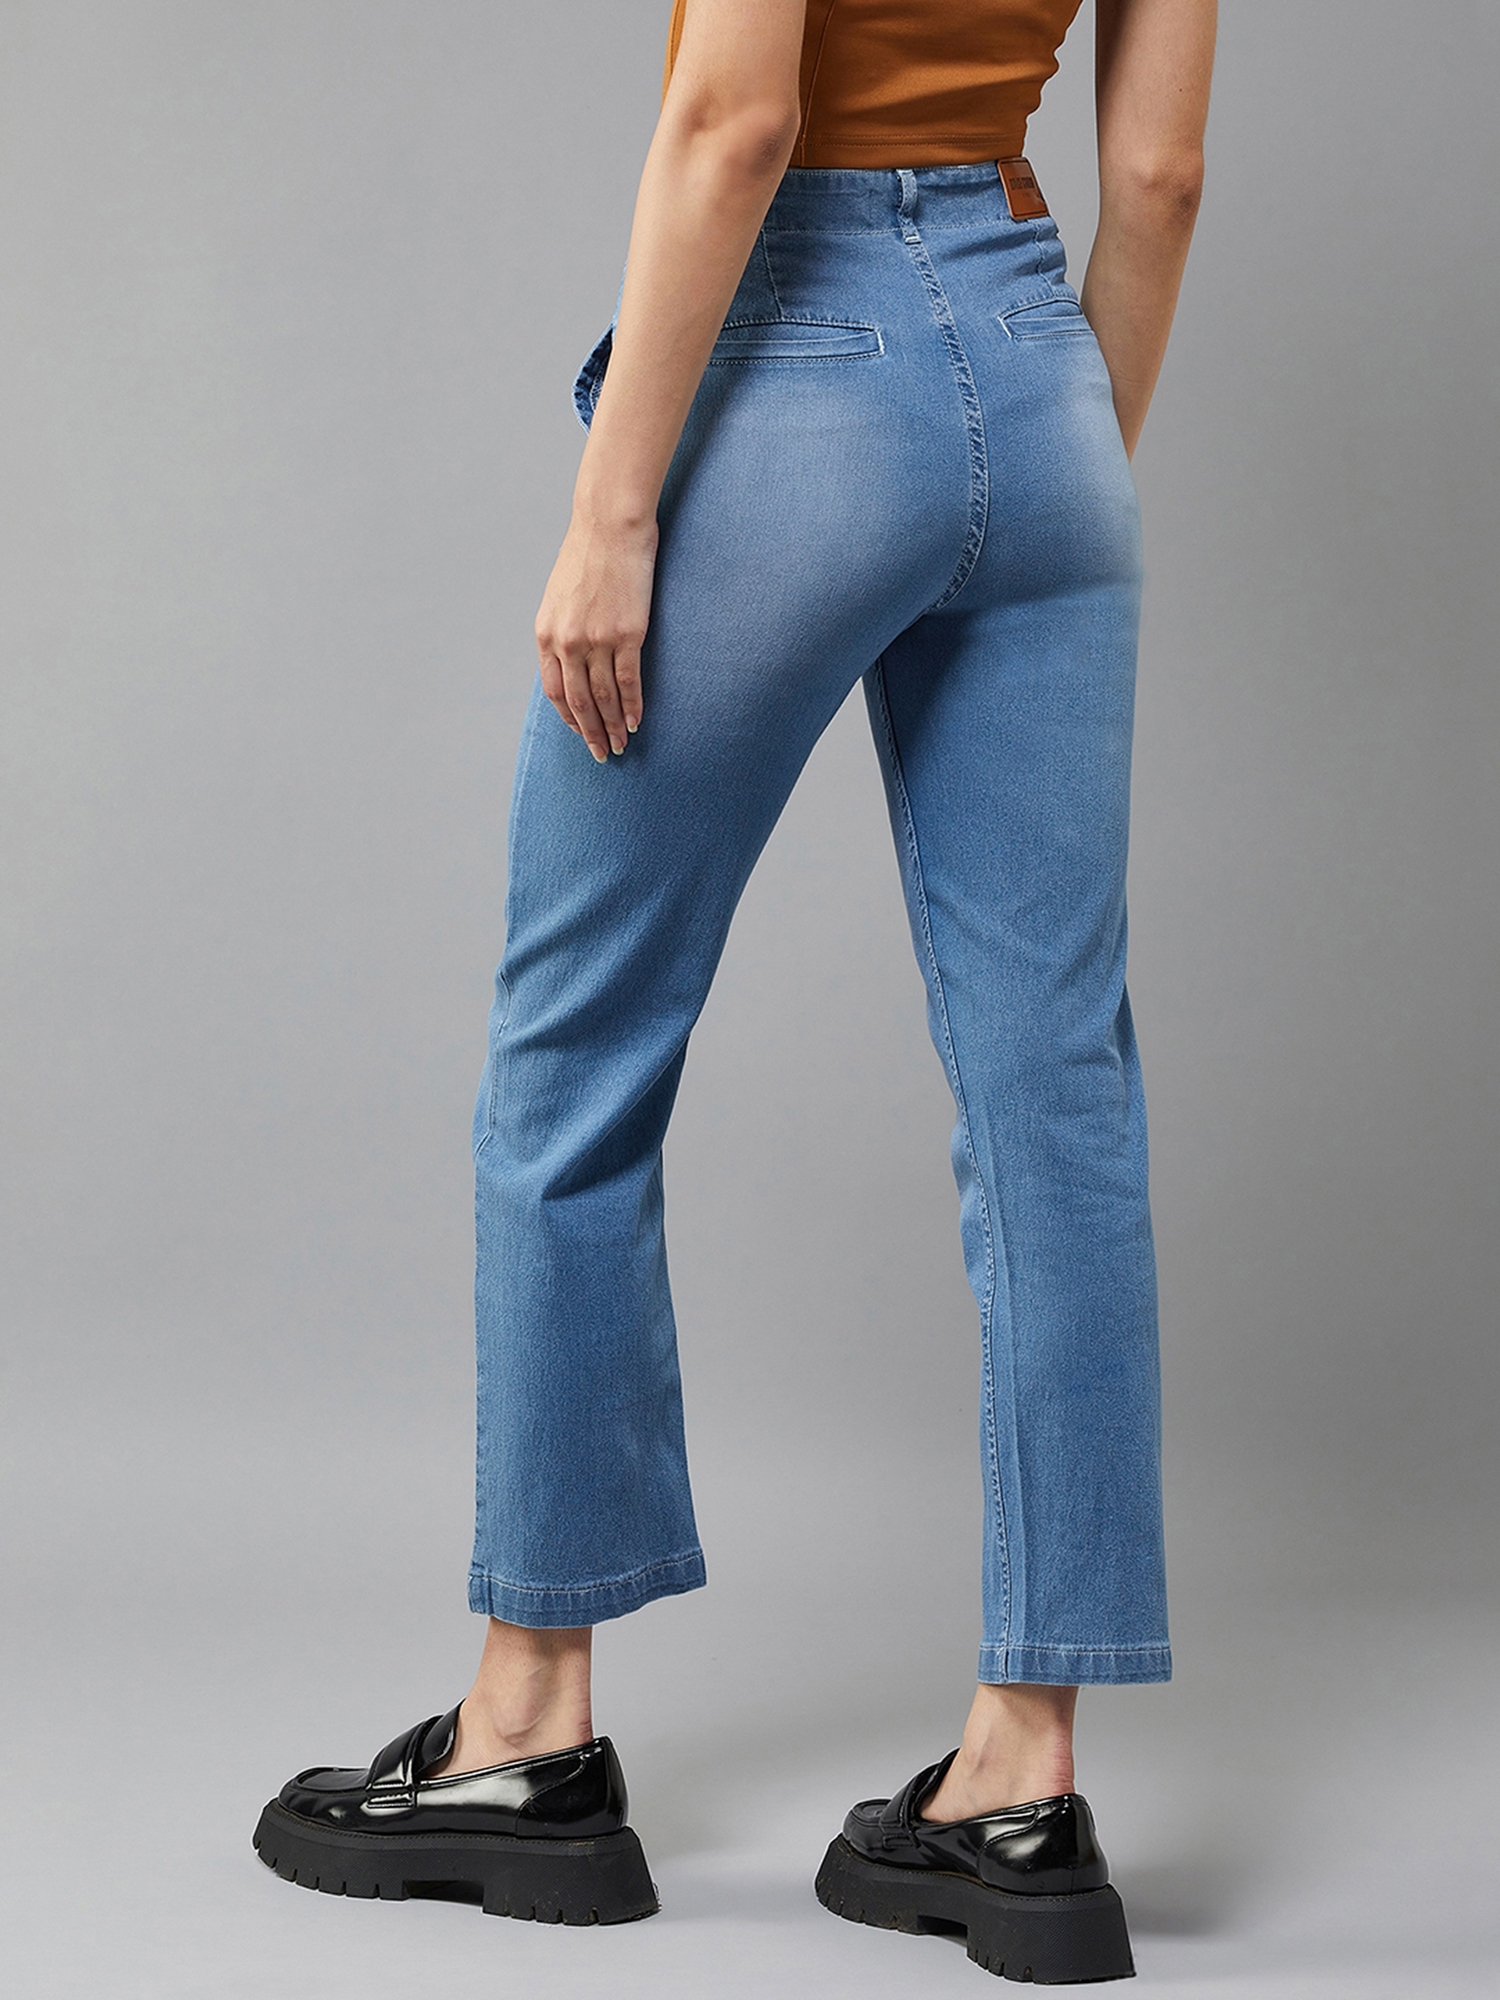 Women's High Waisted Jeans | River Island